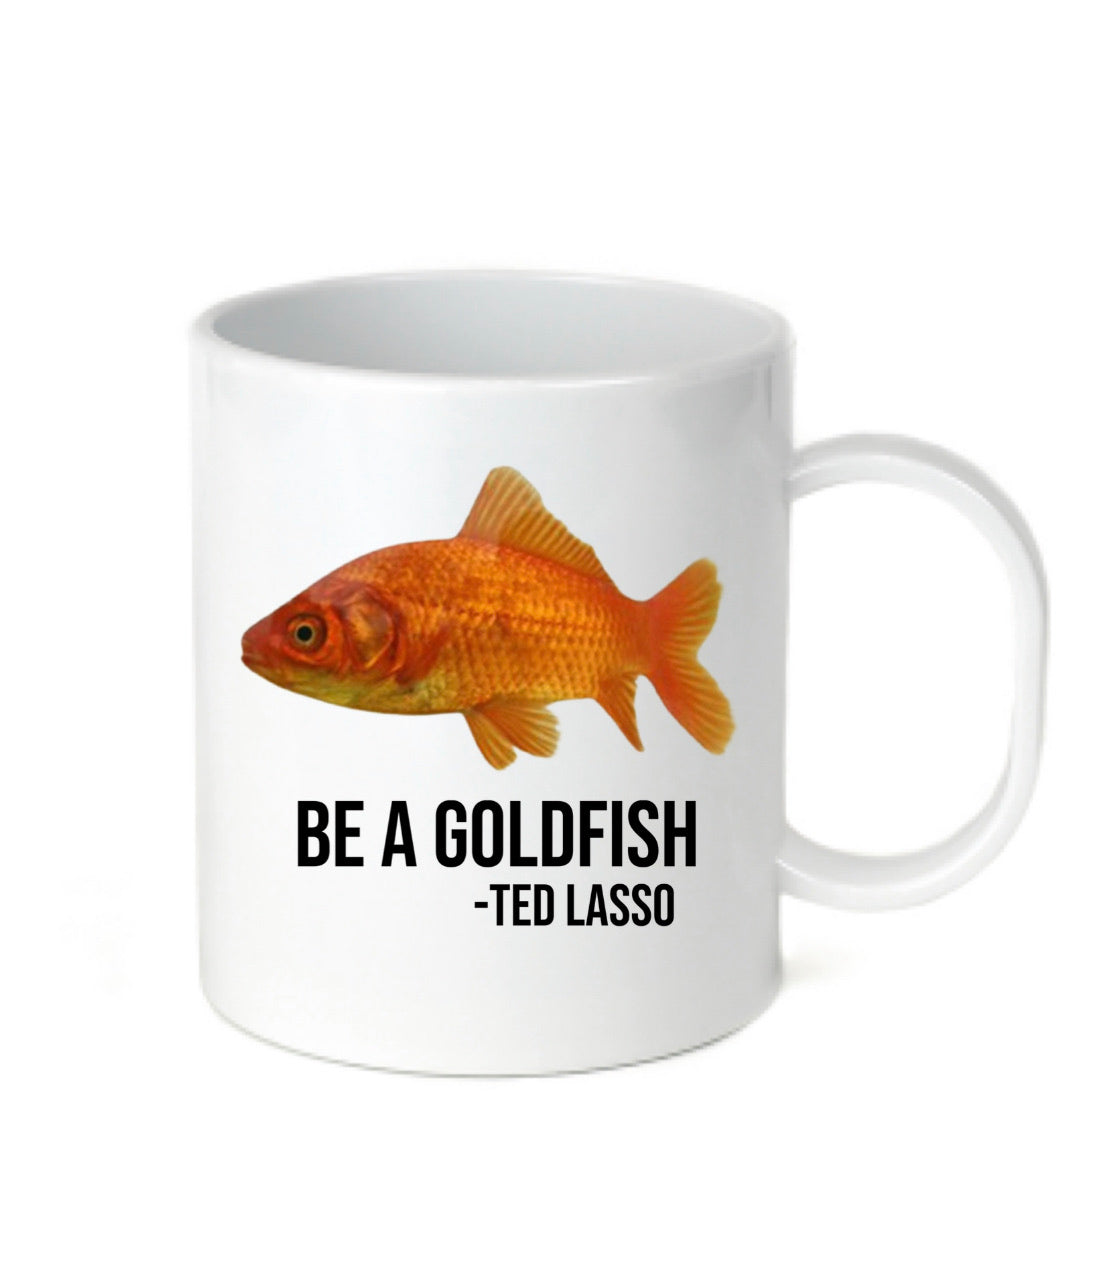 Be a Goldfish - Ted Lasso